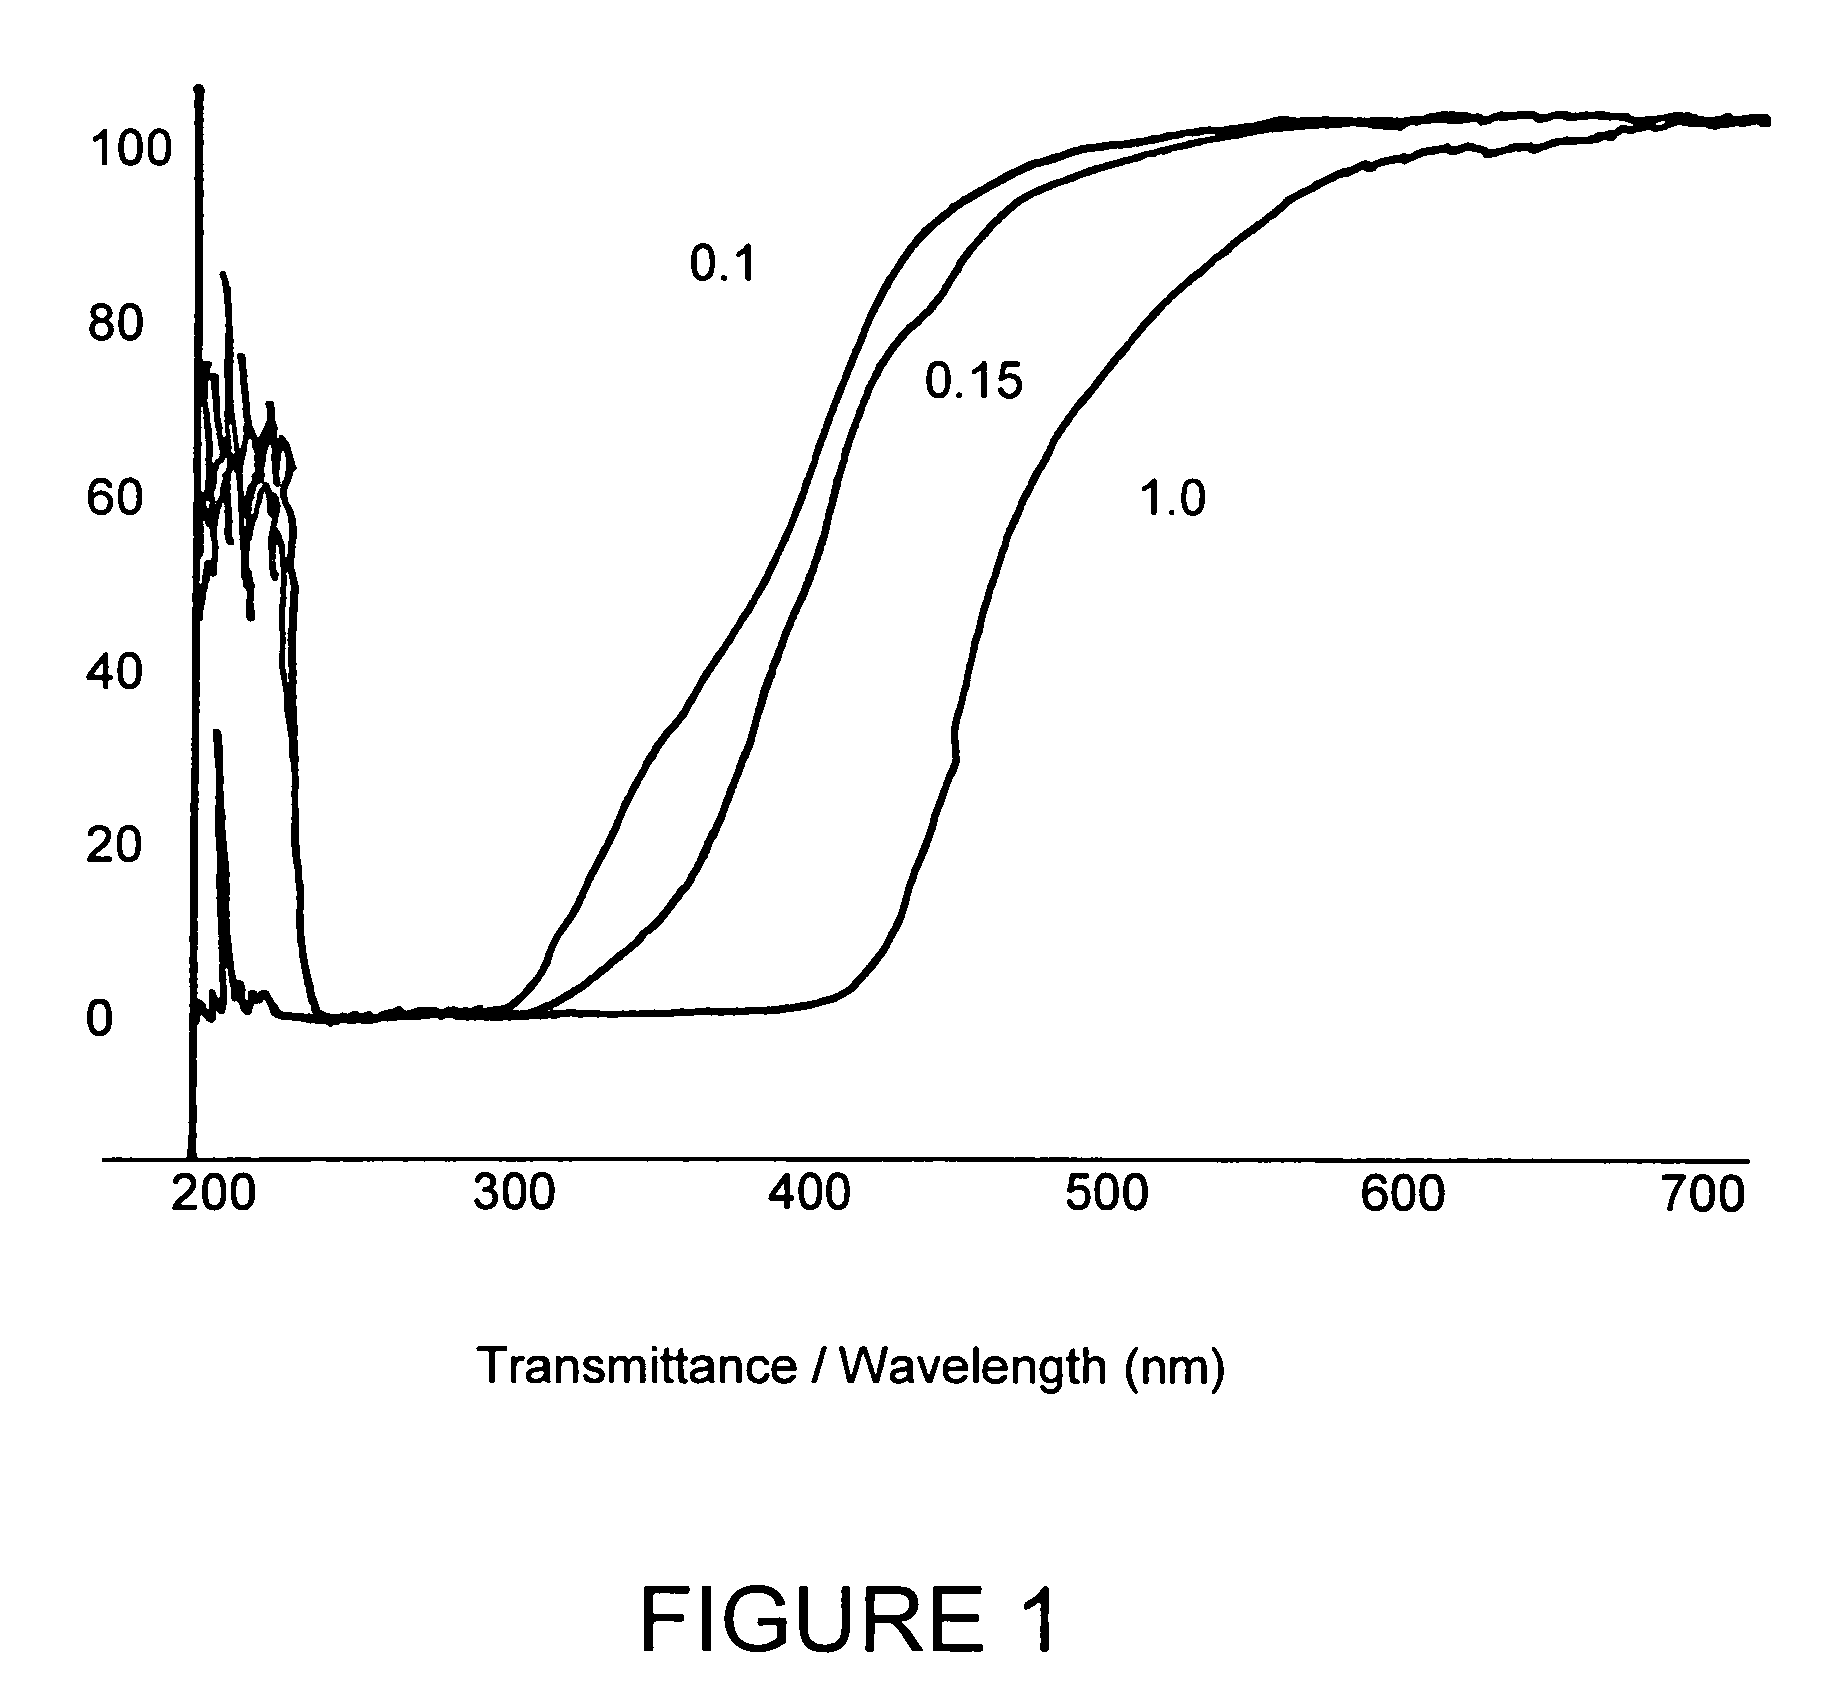 Process for manufacturing intraocular lenses with blue light absorption characteristics